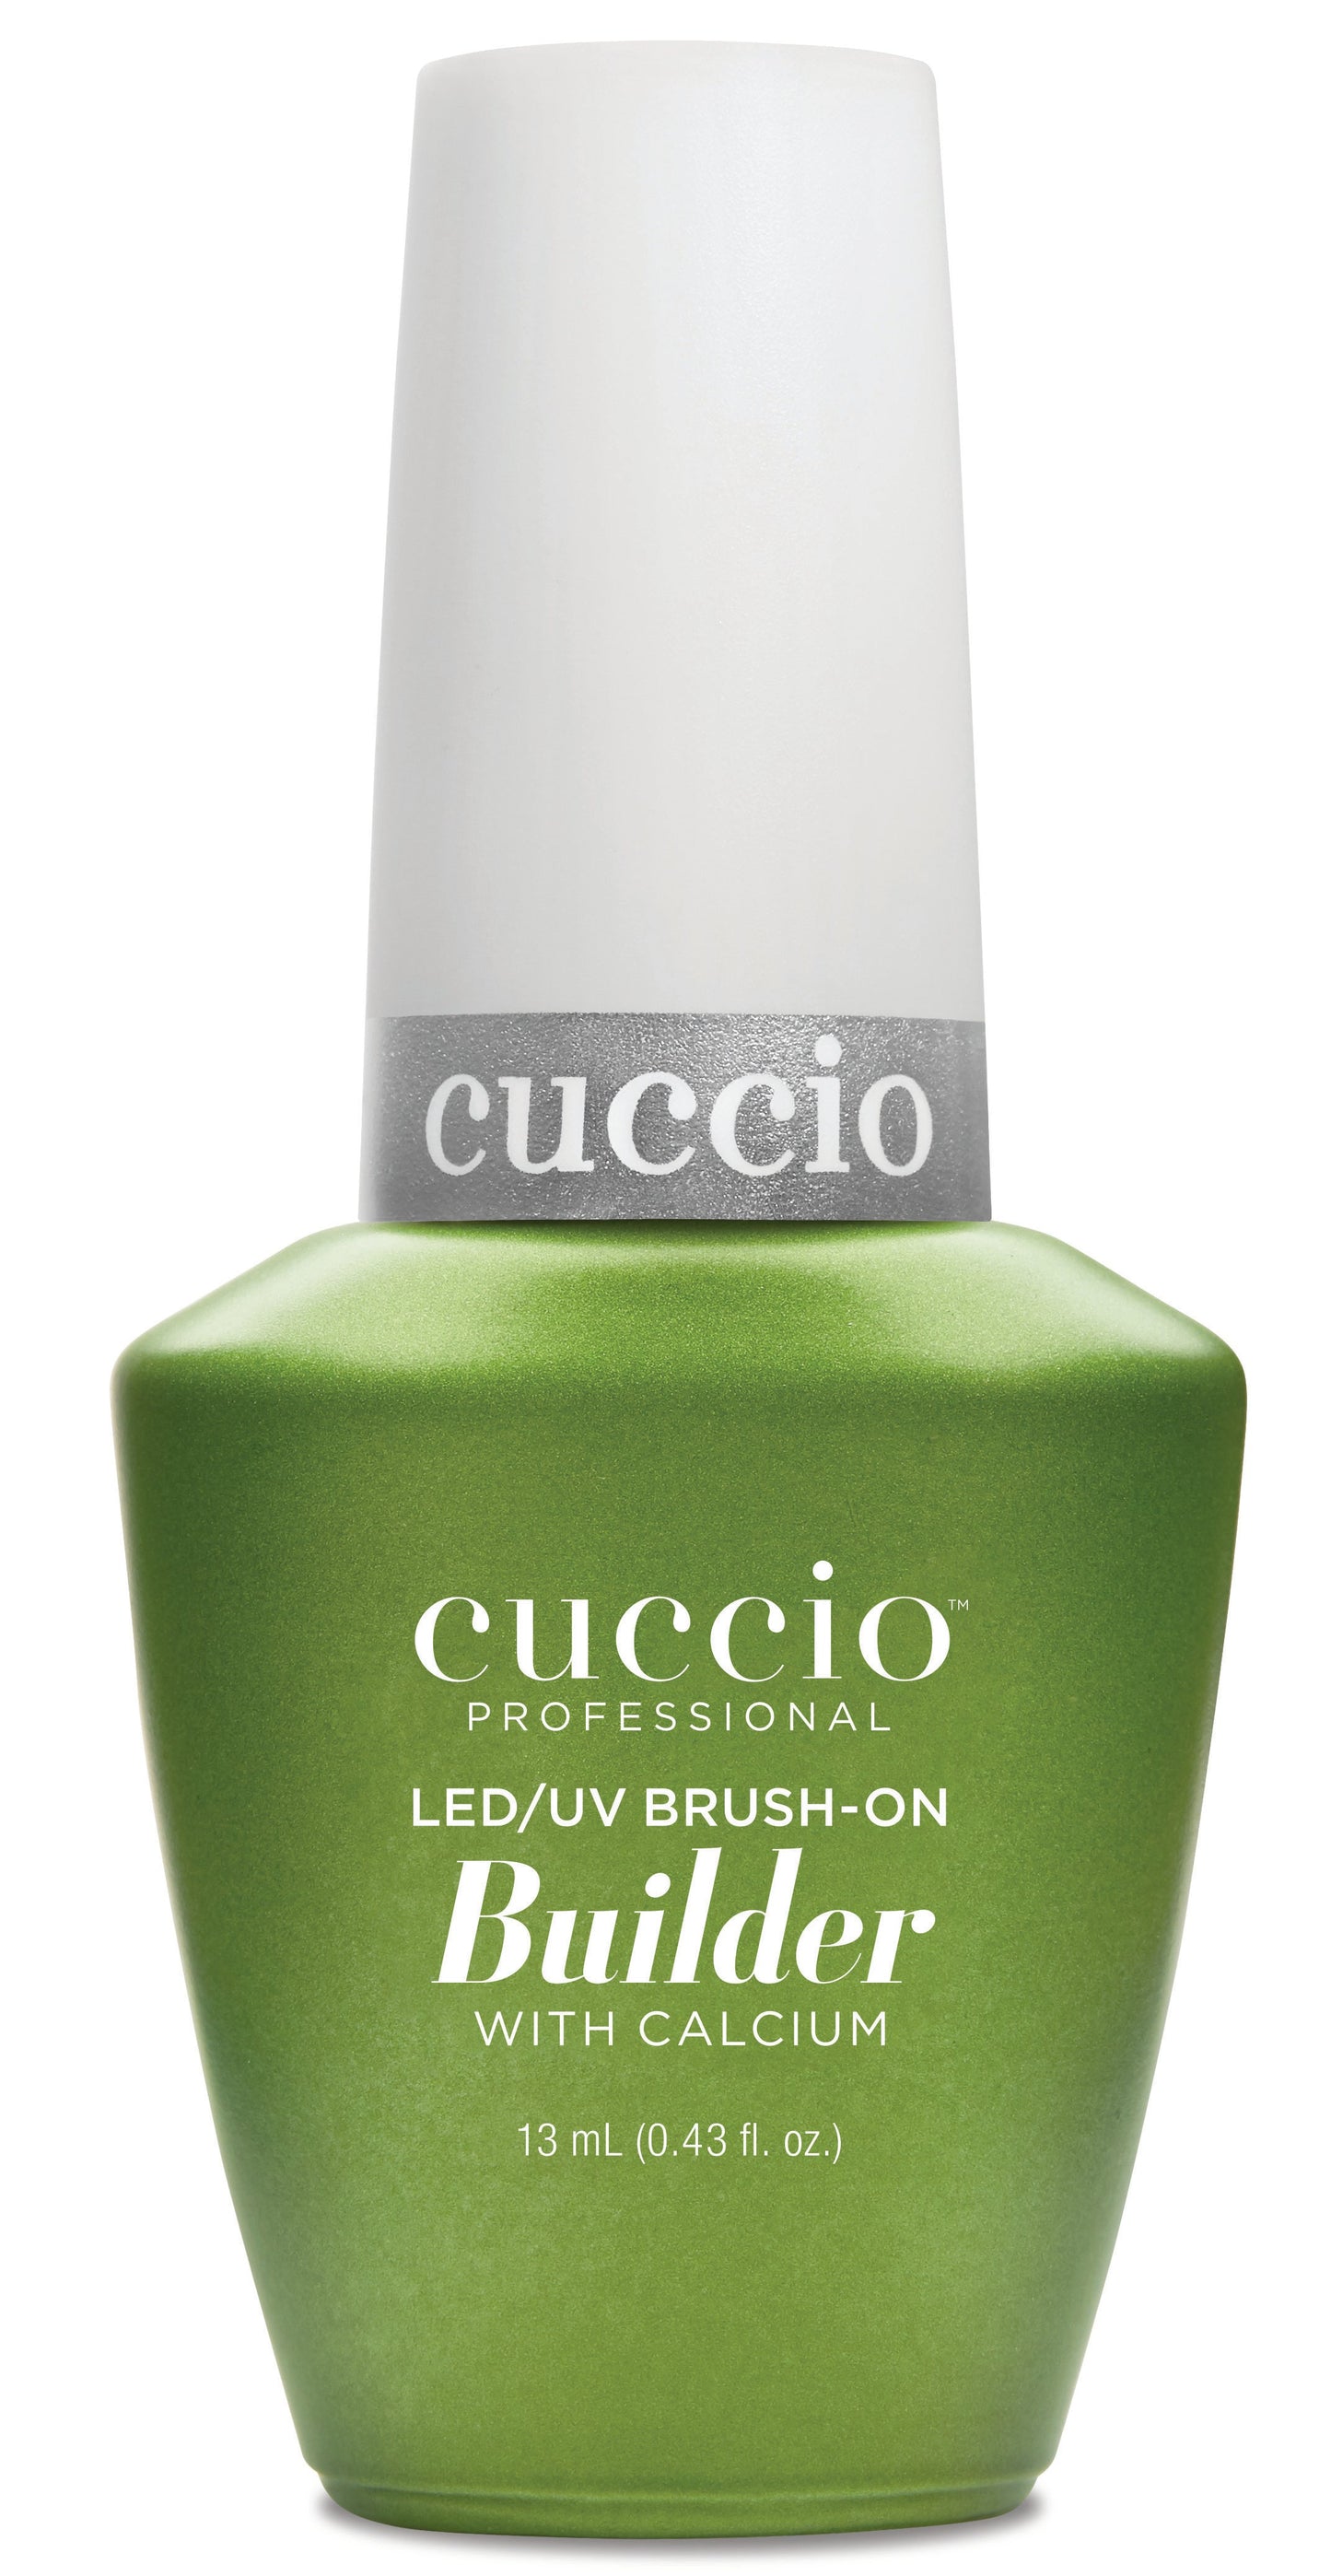 BOGO: Brush-on Builder Gel with Calcium LED/UV Clear + GET Peel It for FREE